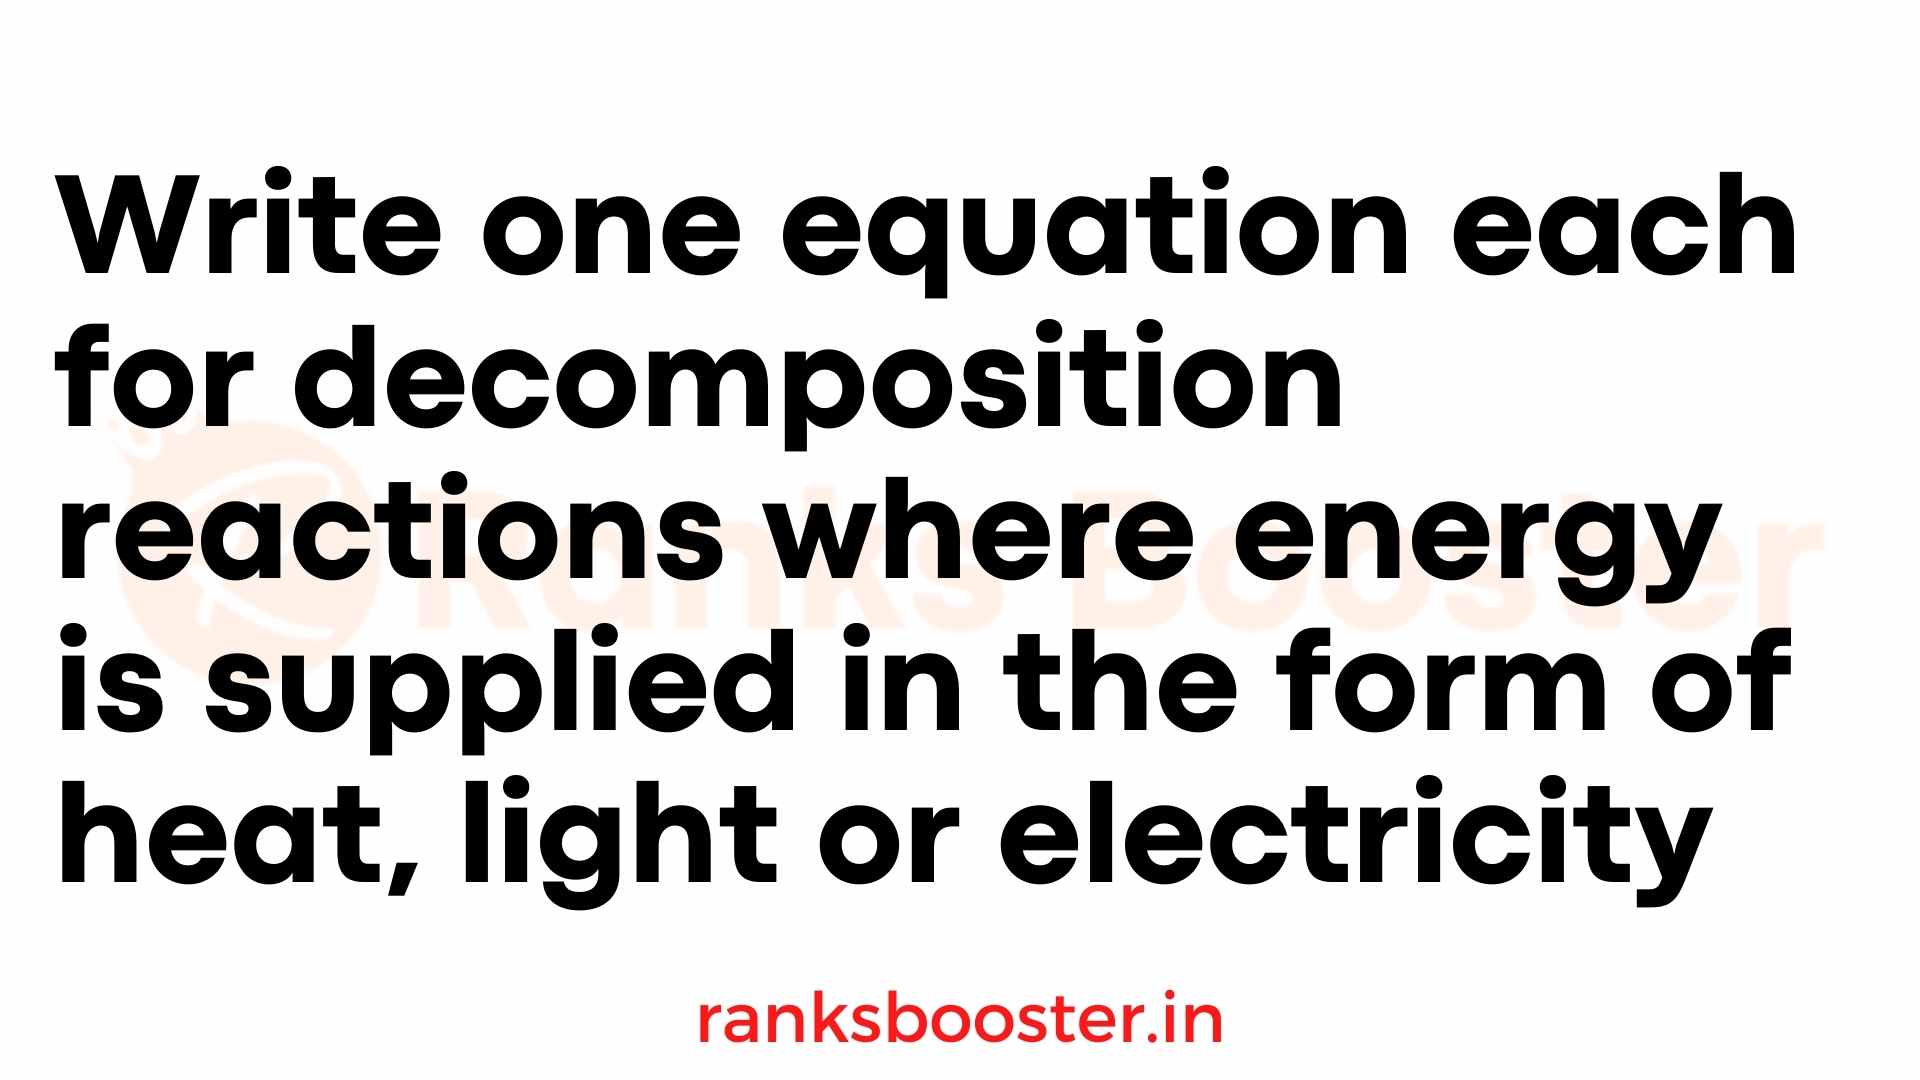 Write one equation each for decomposition reactions where energy is supplied in the form of heat, light or electricity